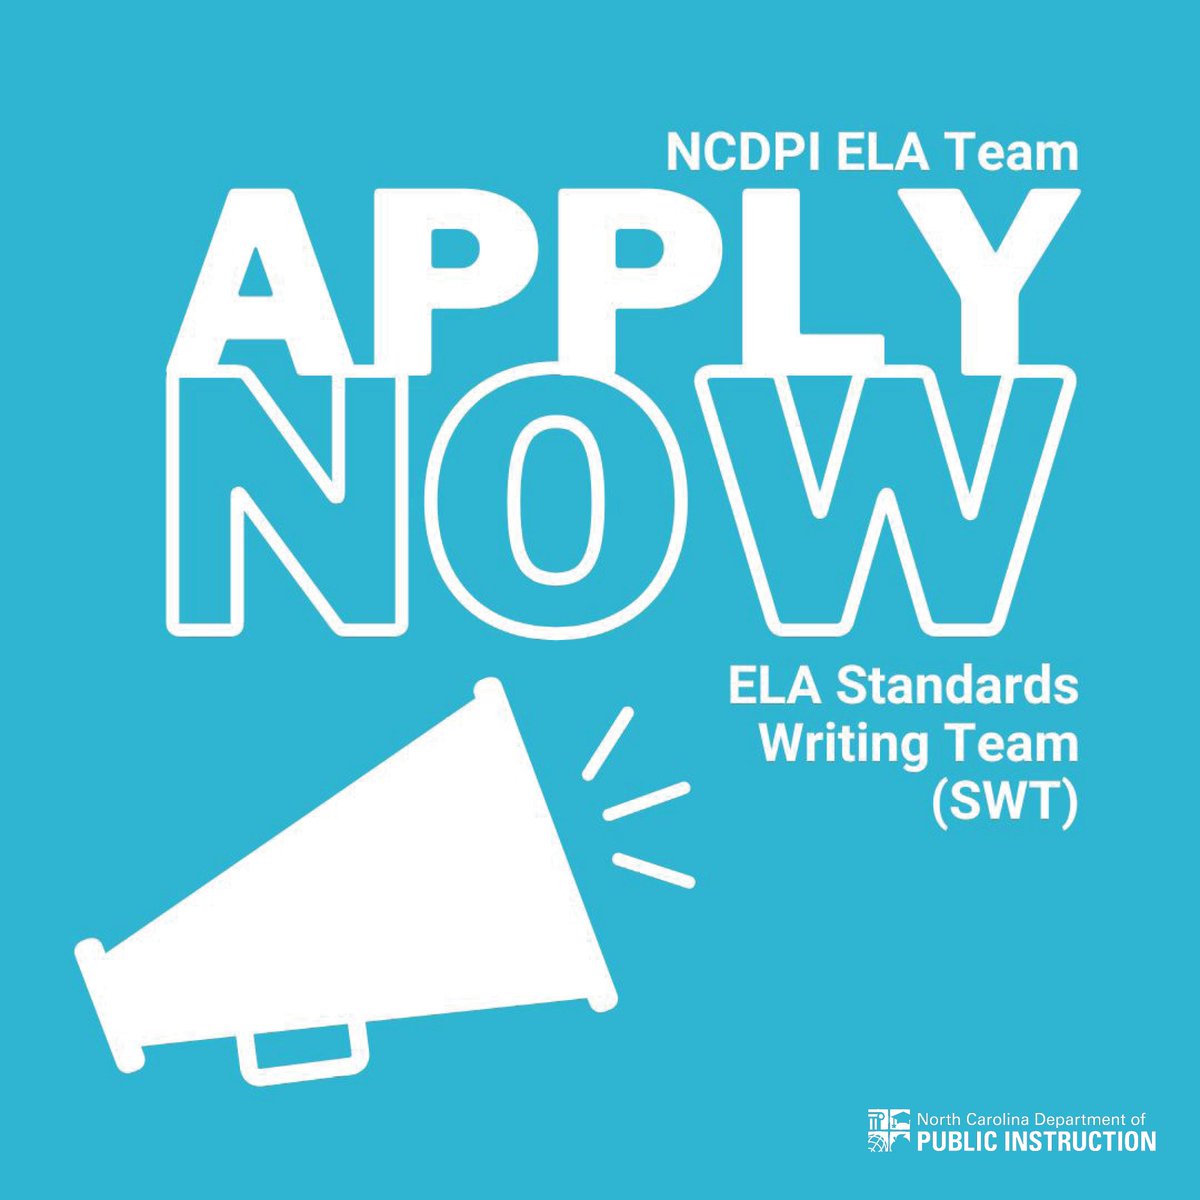 Attention NC educators! Applications now open for our ELA Standards Writing team. This group will review feedback compiled by the DRC and create drafts of the new standards during the 24-25 school year. Apply at go.ncdpi.gov/2bdmr. Application deadline is May 31.